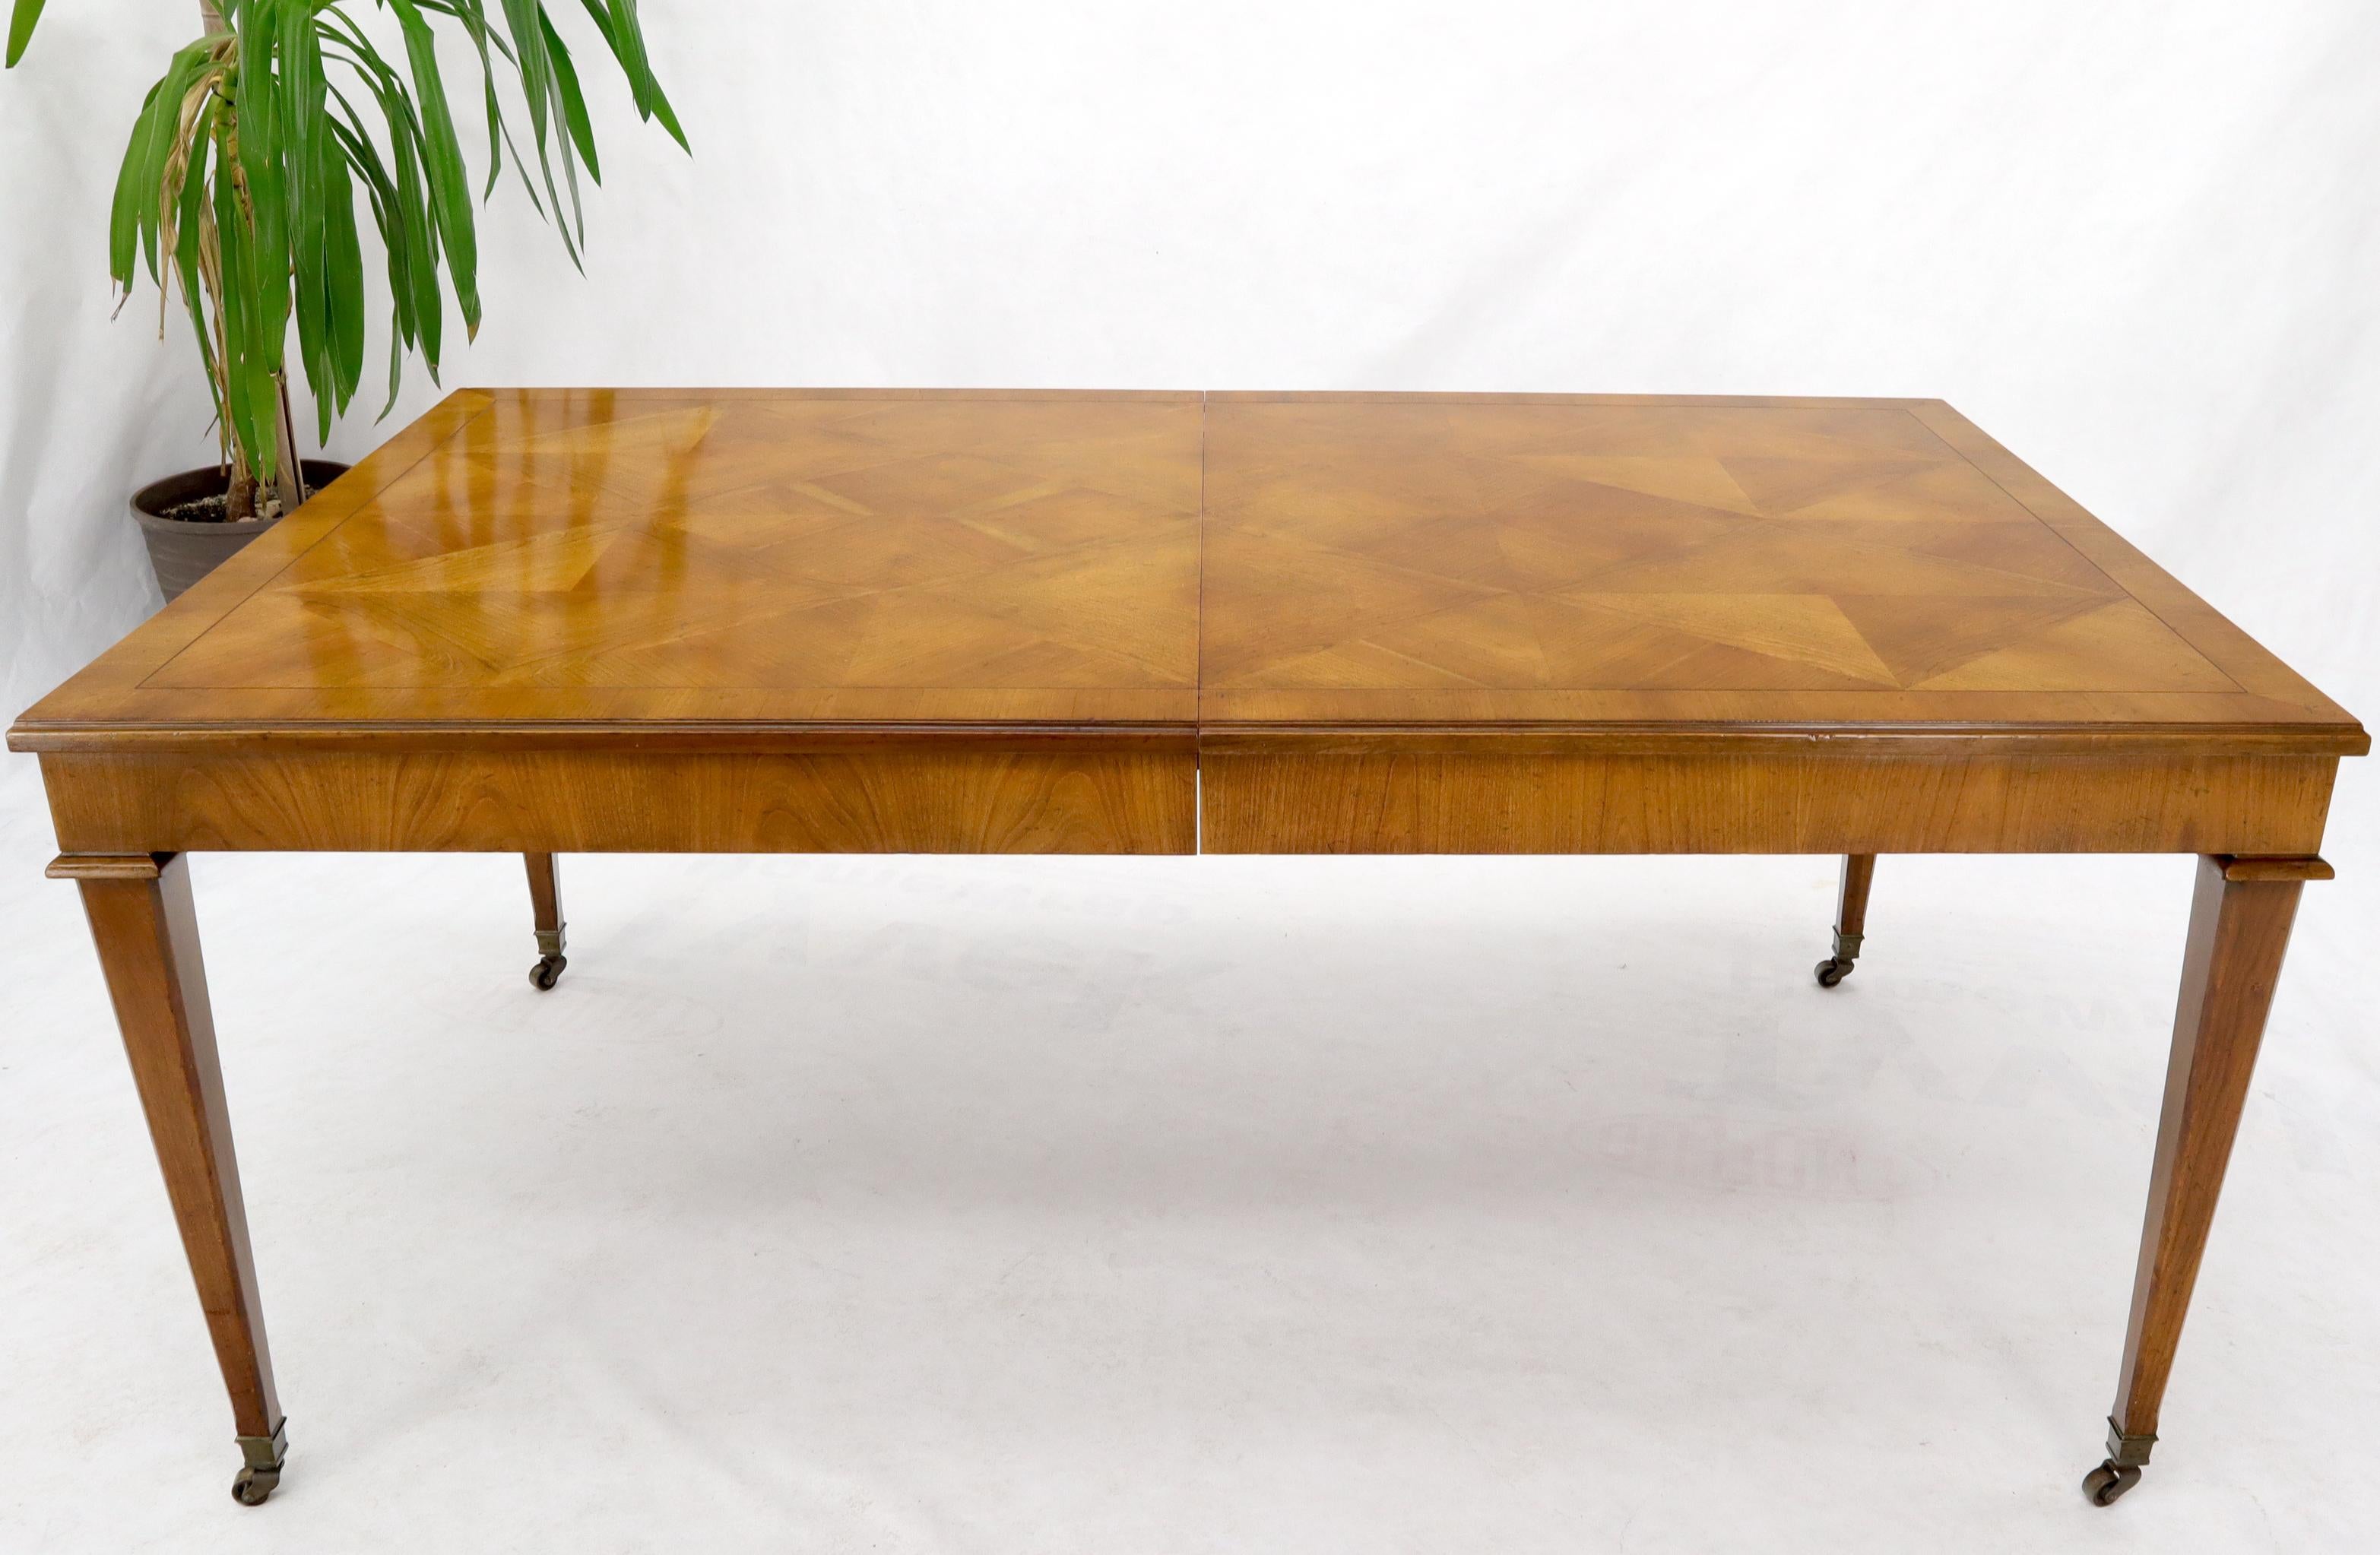 Mid-Century Modern parquet top dining table with 2 x 18